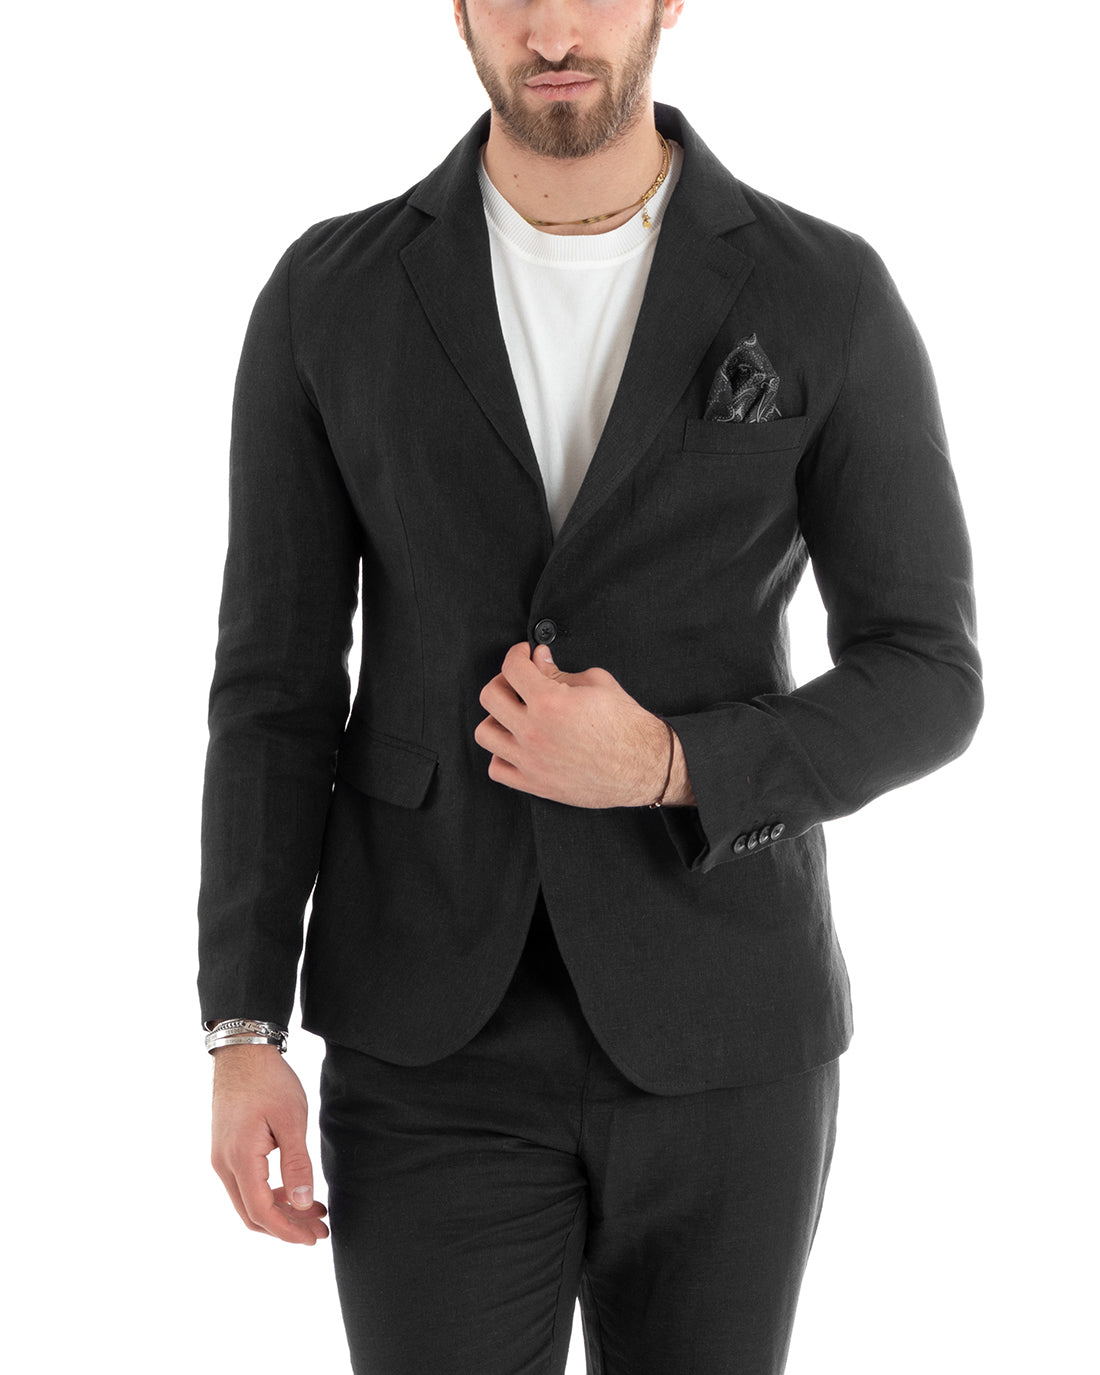 Single-breasted men's suit, tailored linen suit, jacket, trousers, solid color, black GIOSAL-OU2325A